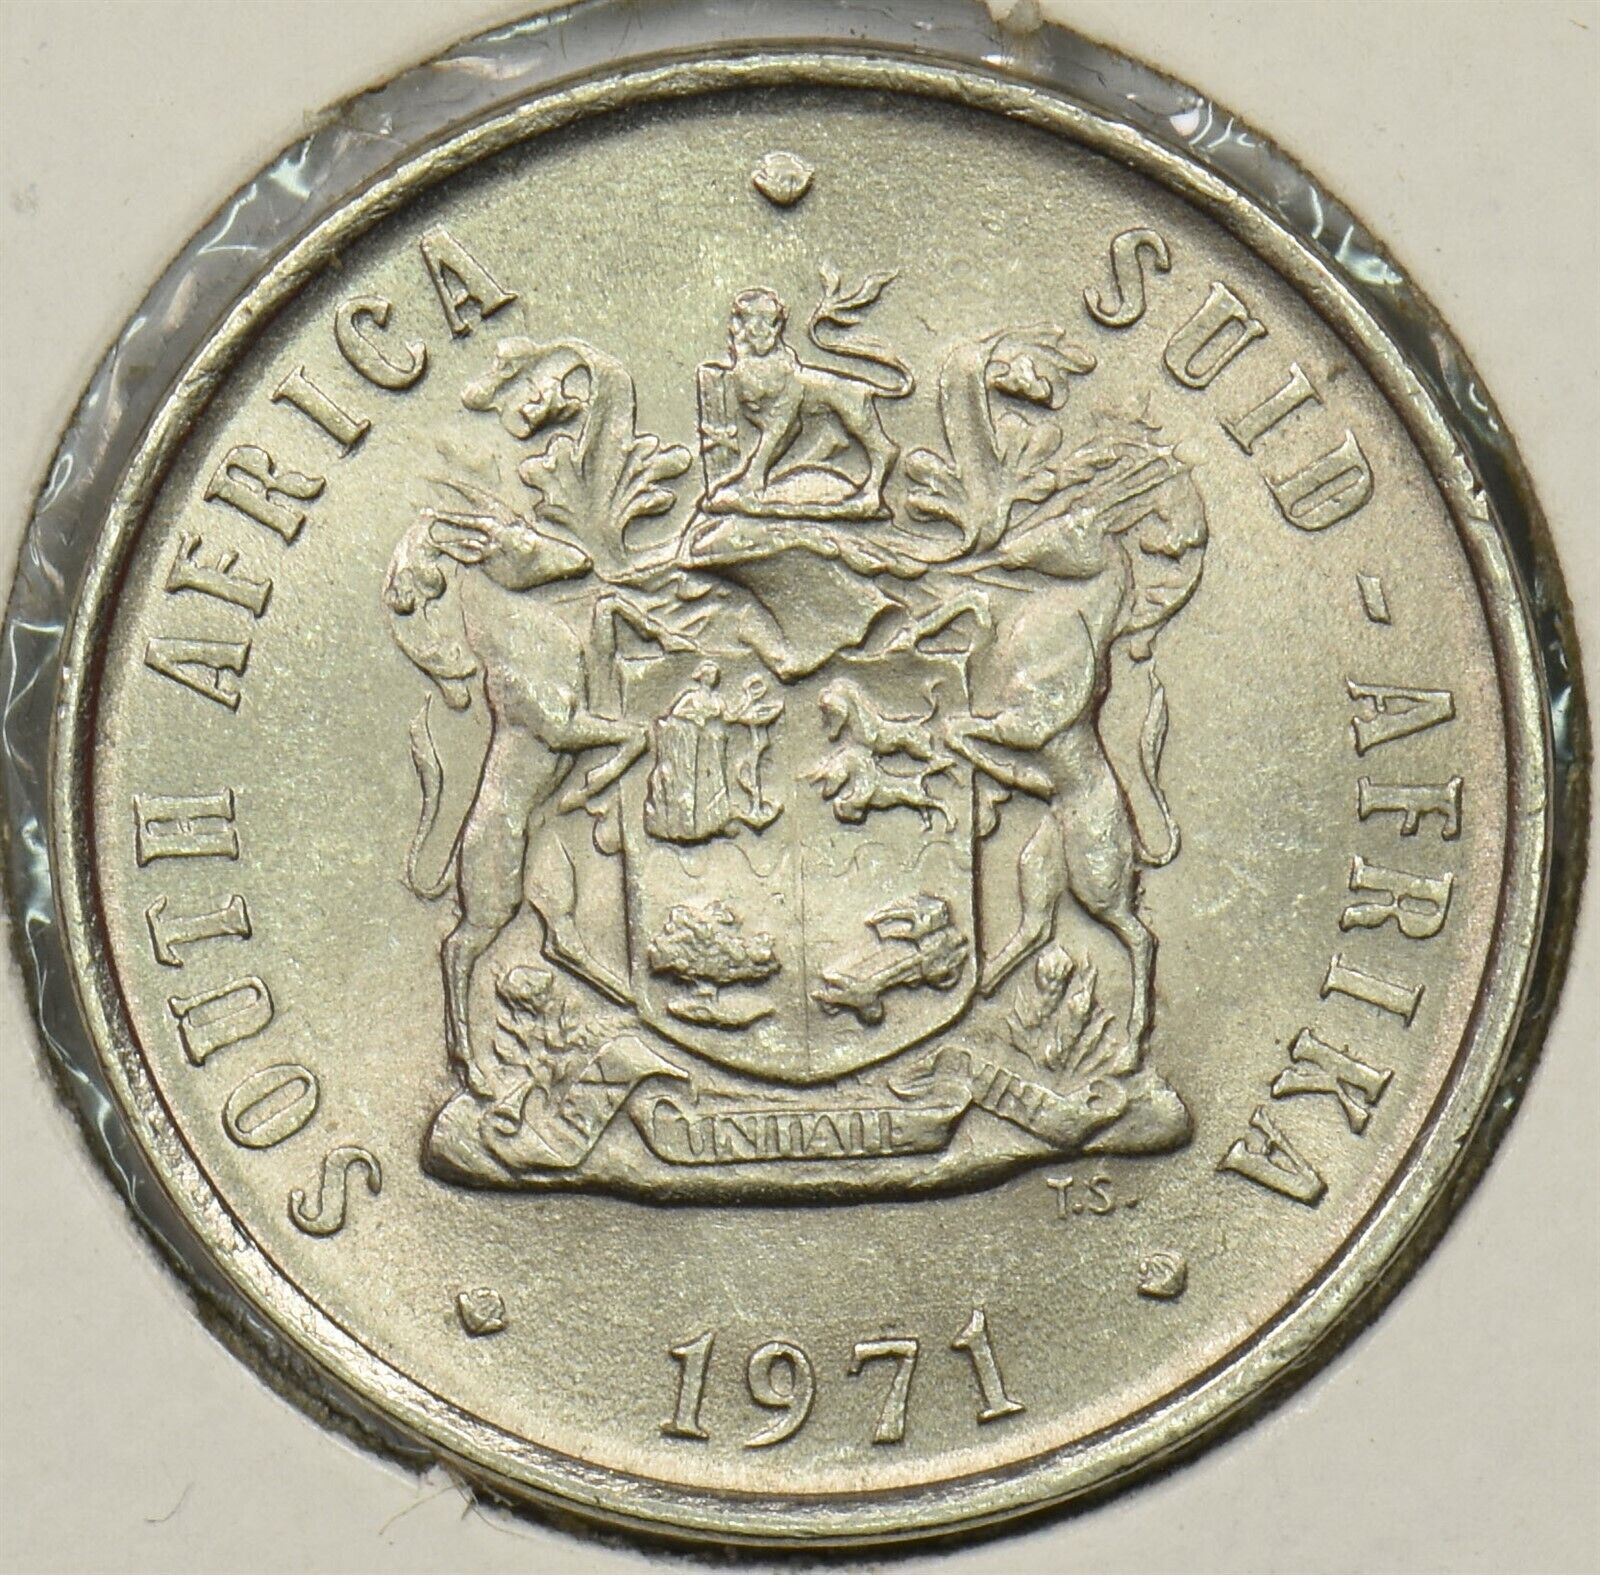 South Africa 1971 10 Cents P900294 Combine Shipping